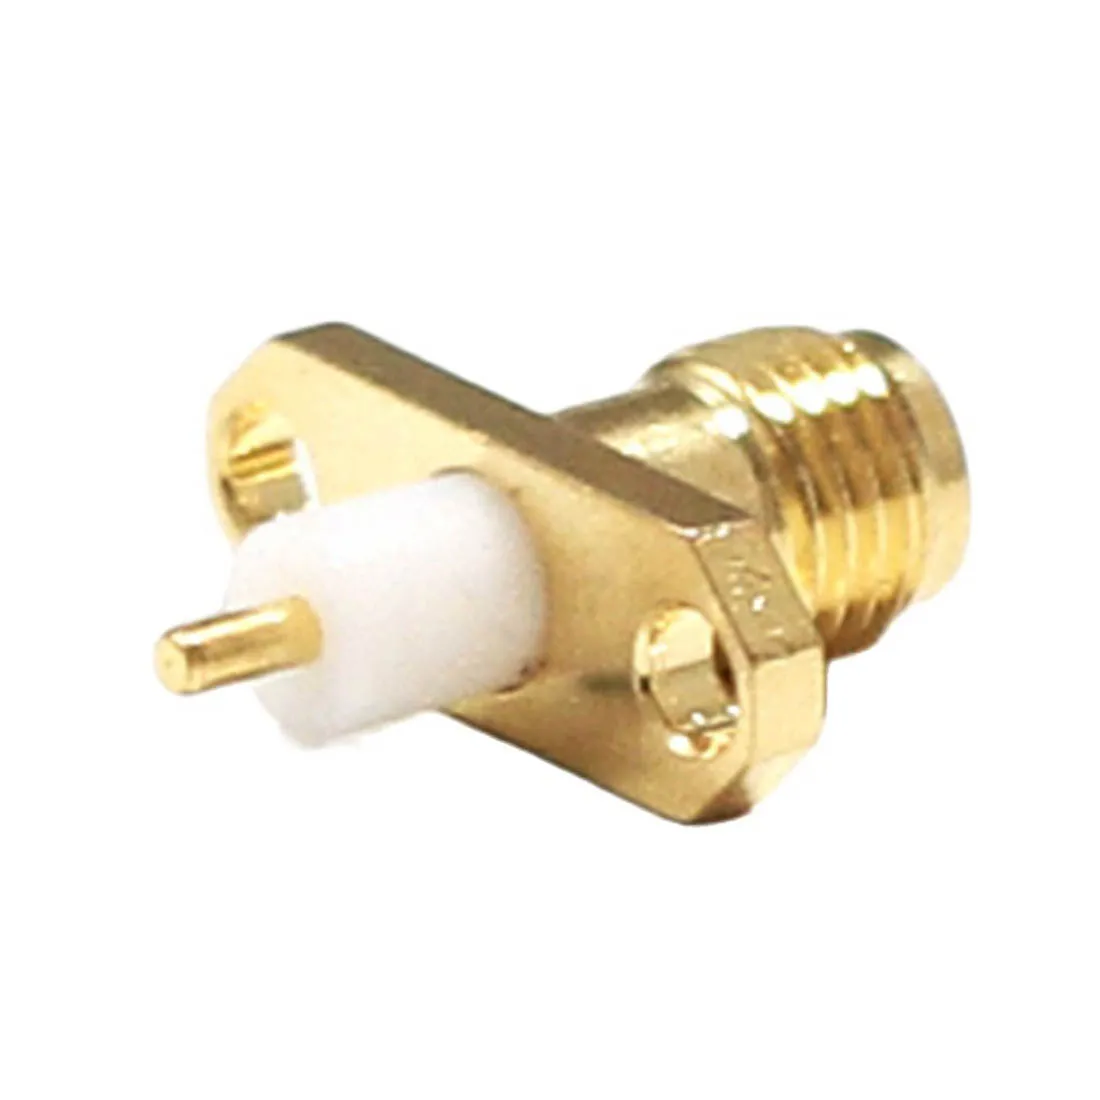 1pc NEW  SMA Female Jack RF Coax Modem Convertor Connector Panel Mount Solder Post Straight Insulator Long 4mm Goldplated uhf so239 female to so 239 femalejack flange 4 holes panel mount adapter connector